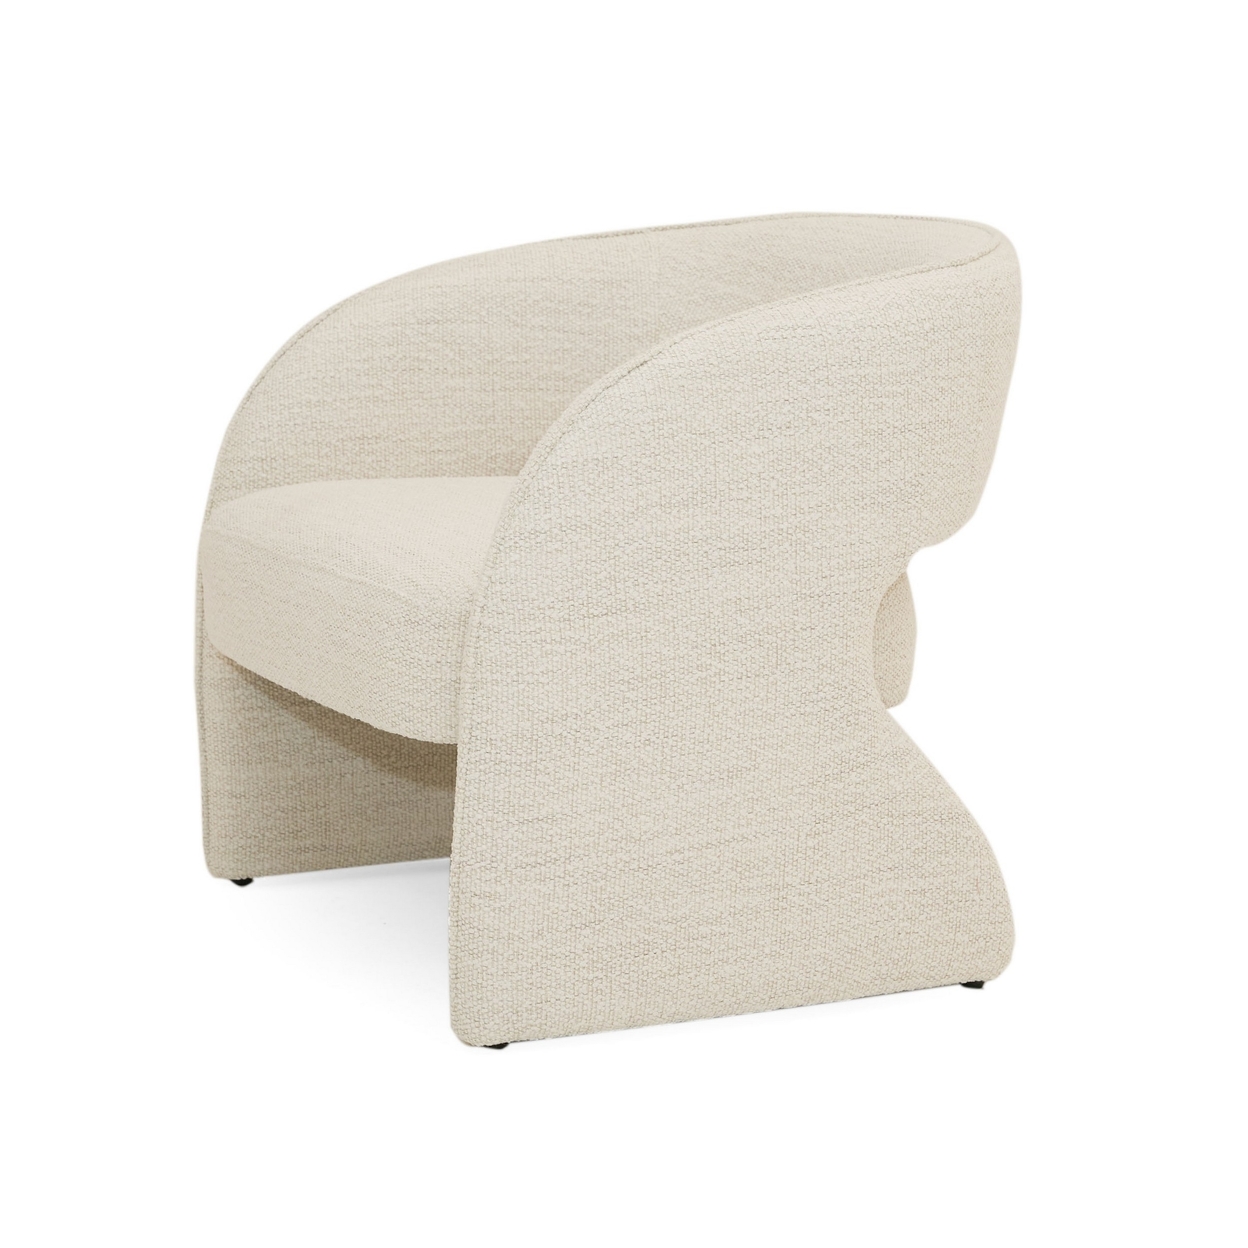 31 Inch Accent Chair, Cream Fabric, Curved Back, Round Arms, Plush Seat- Saltoro Sherpi